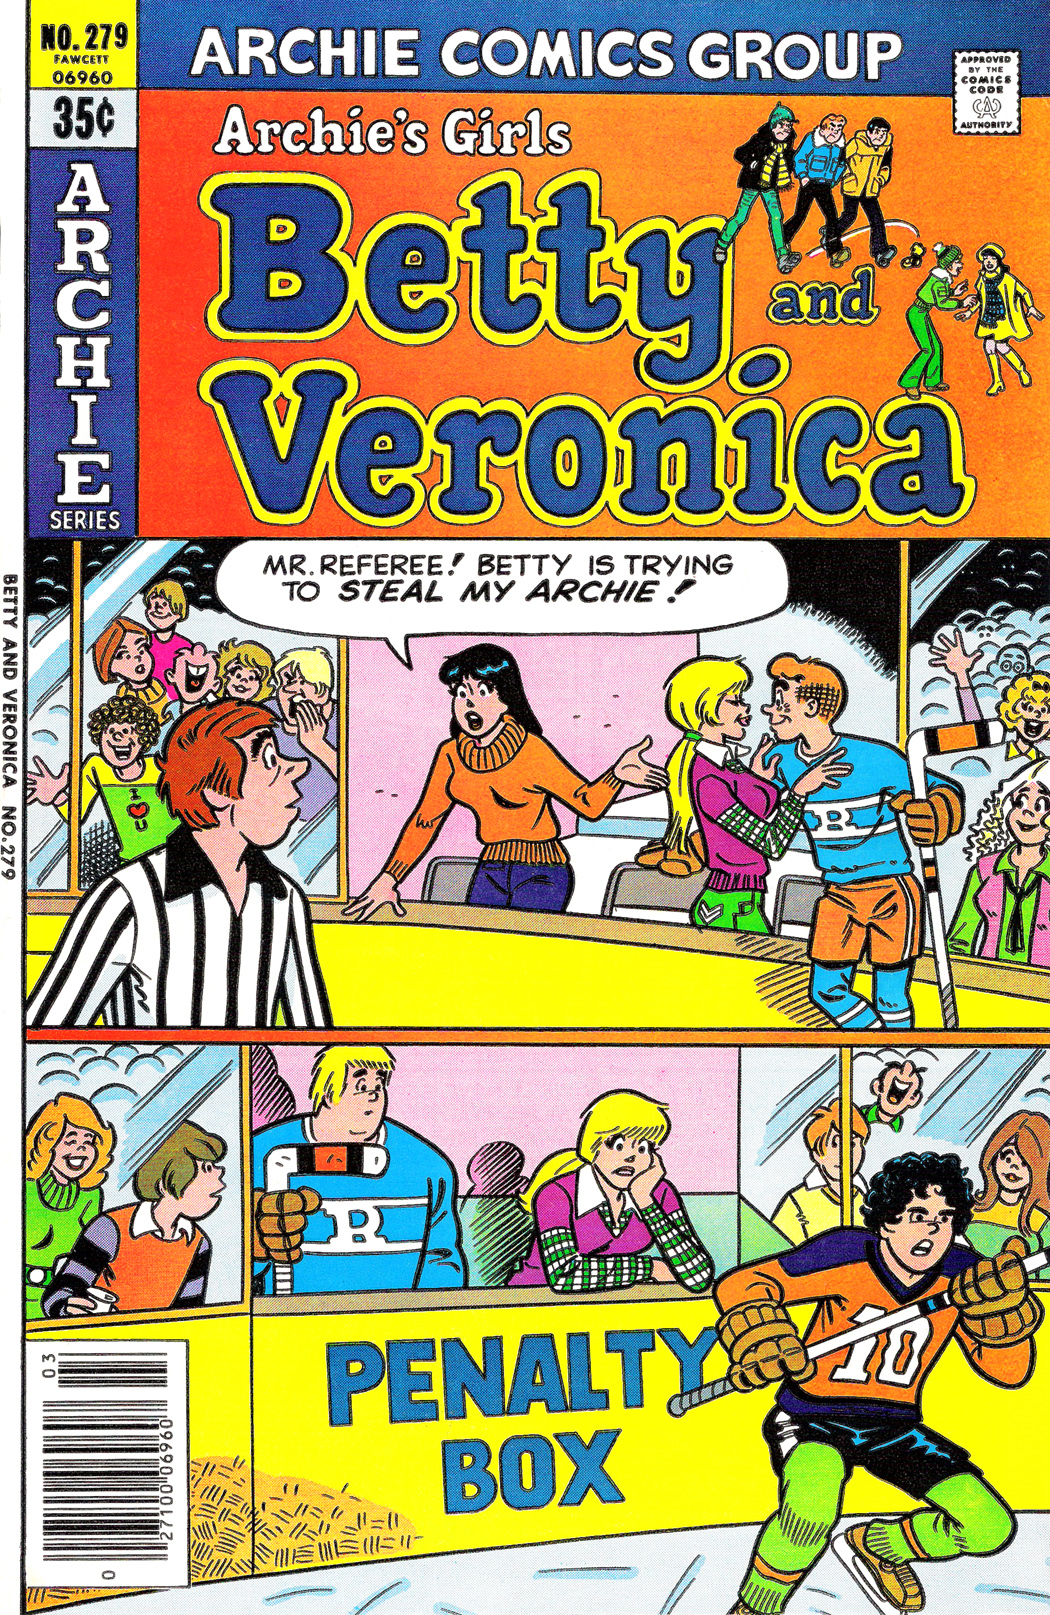 Read online Archie's Girls Betty and Veronica comic -  Issue #279 - 1